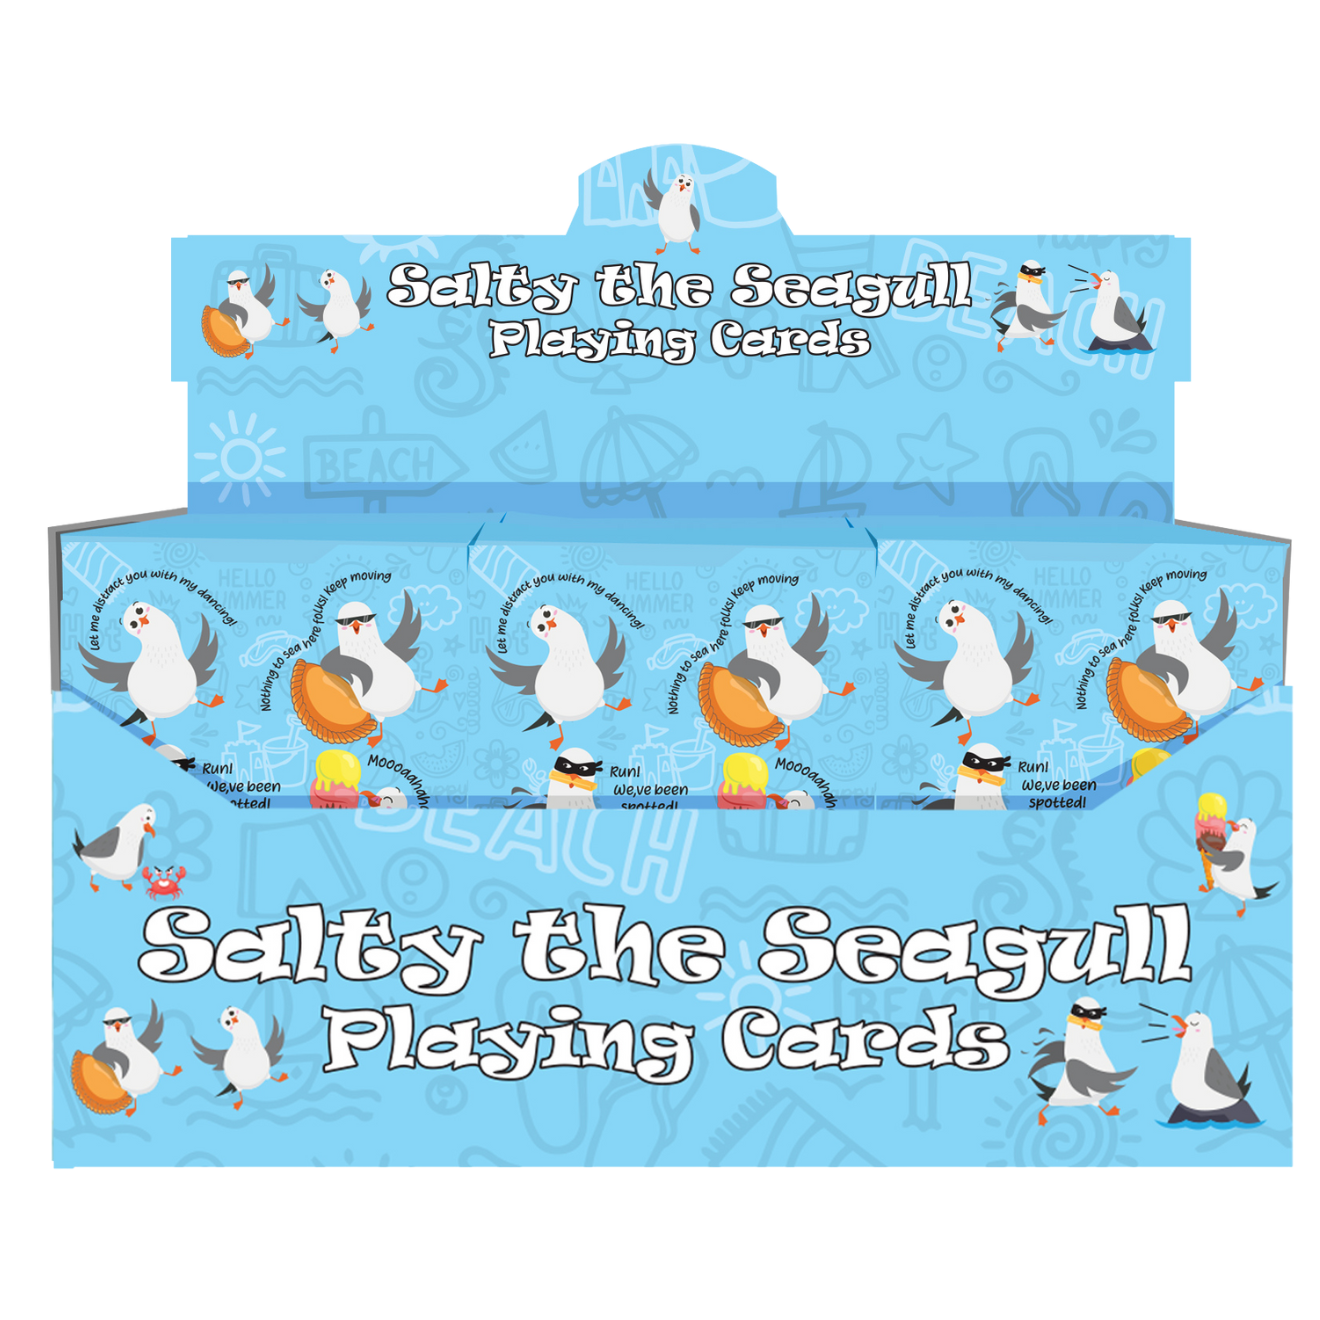 Salty the Seagull Playing Cards